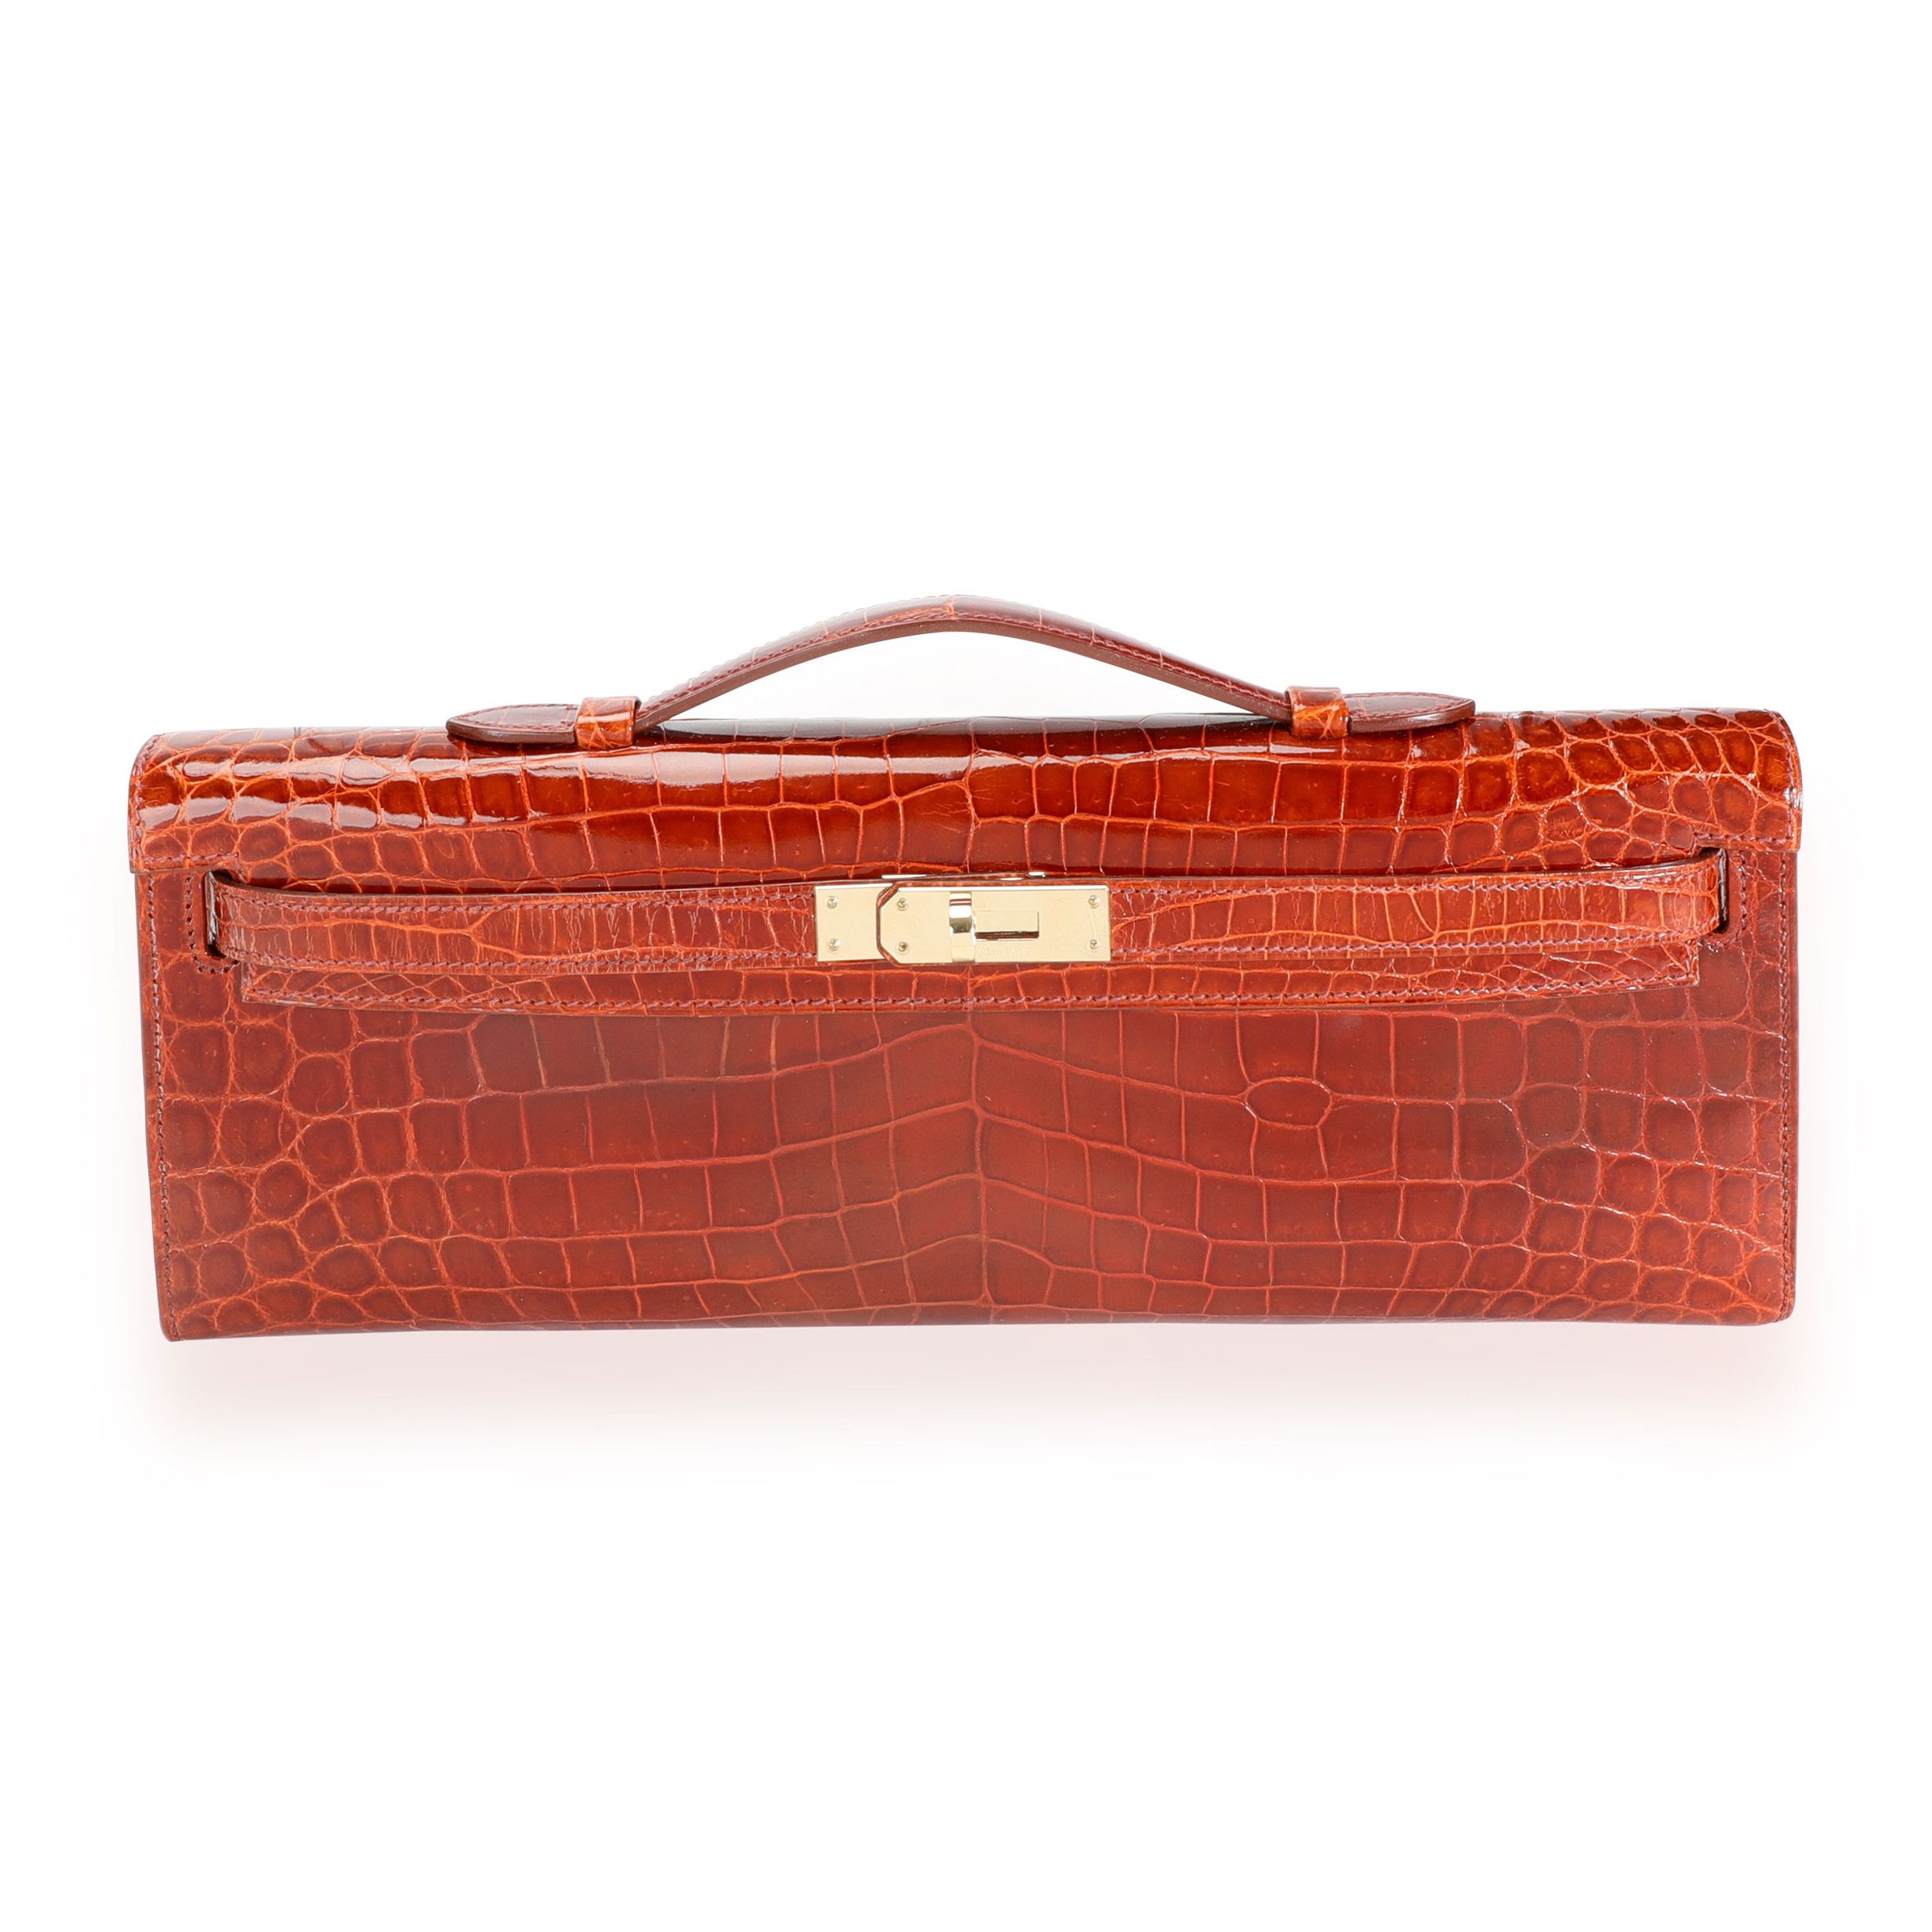 image of Hermes Miel Shiny Niloticus Crocodile Kelly Cut Ghw in Red, Women's